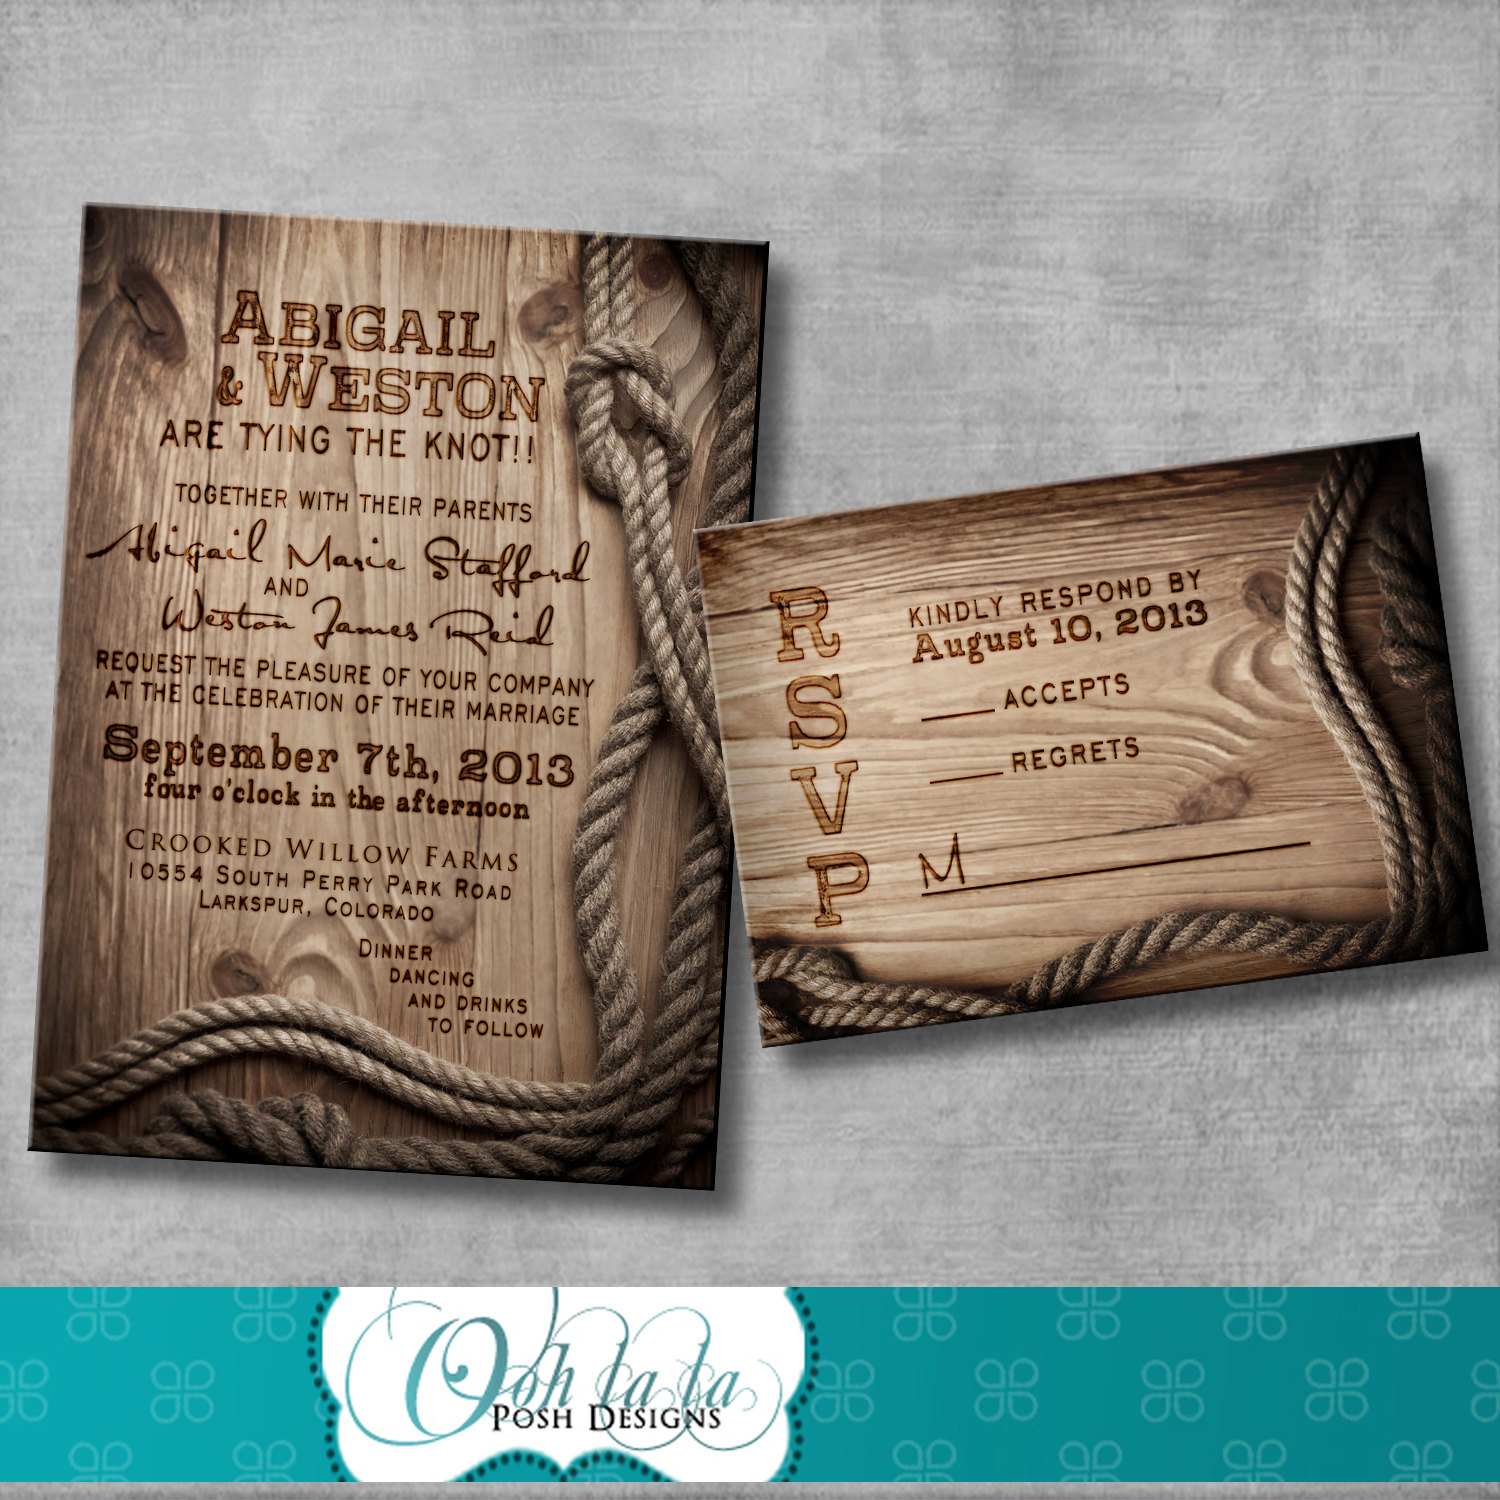 Western Wedding Invitations Templates The Best Wedding Picture In intended for dimensions 1500 X 1500